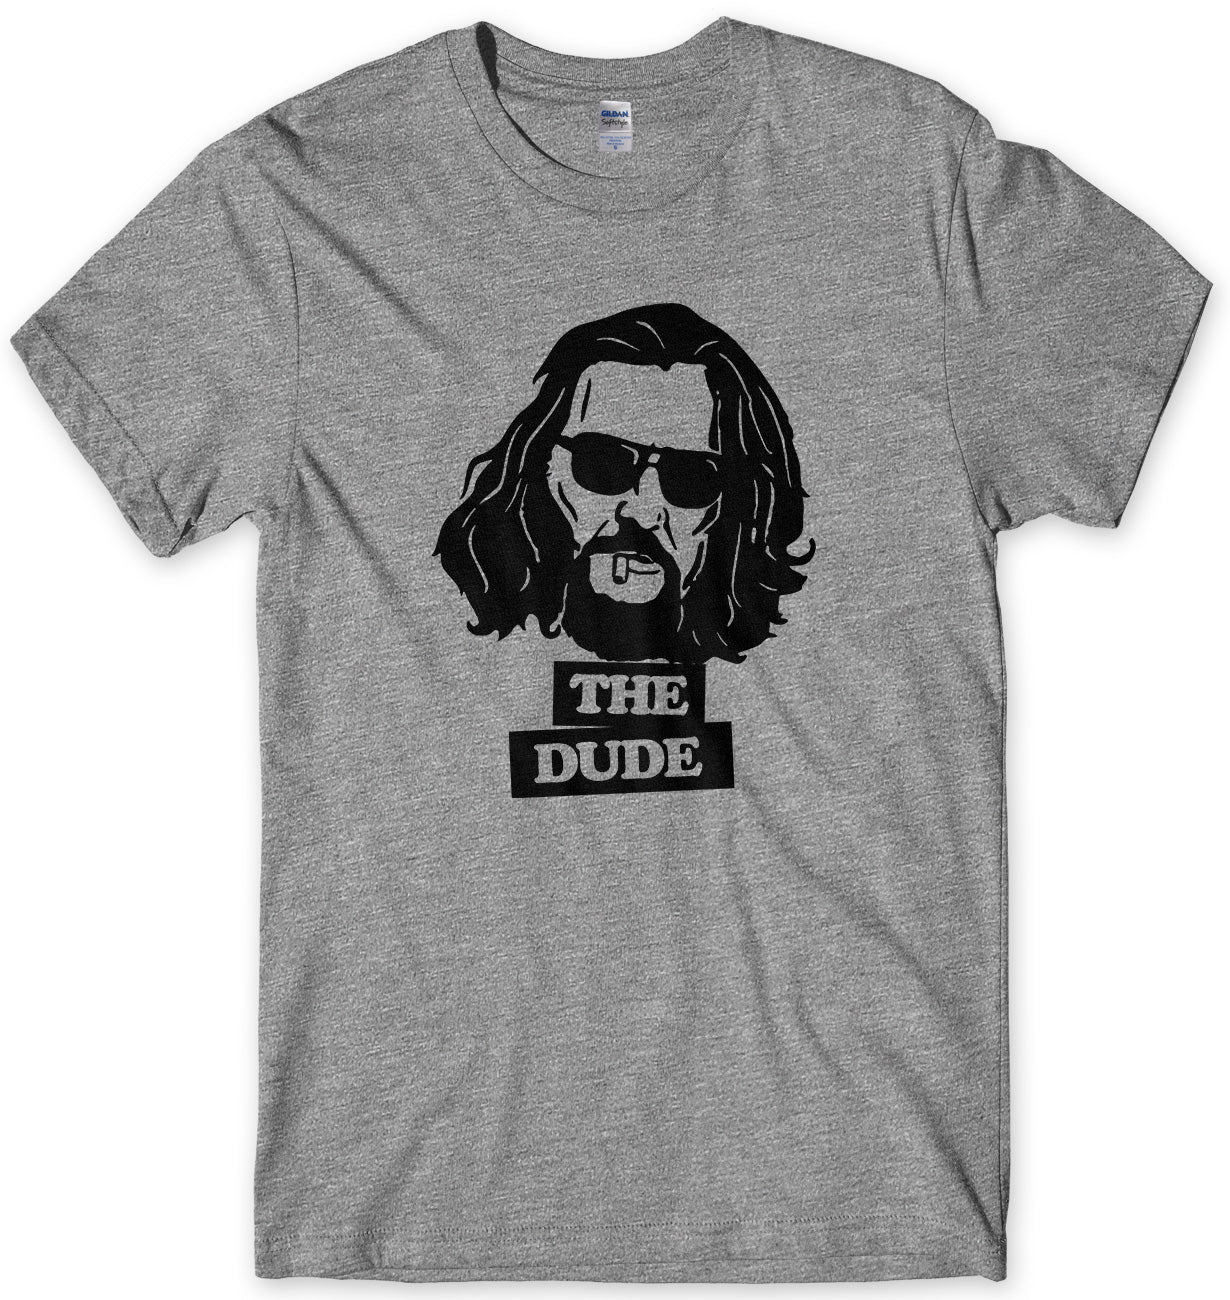 THE DUDE - INSPIRED BY THE BIG LEBOWSKI MENS UNISEX T-SHIRT